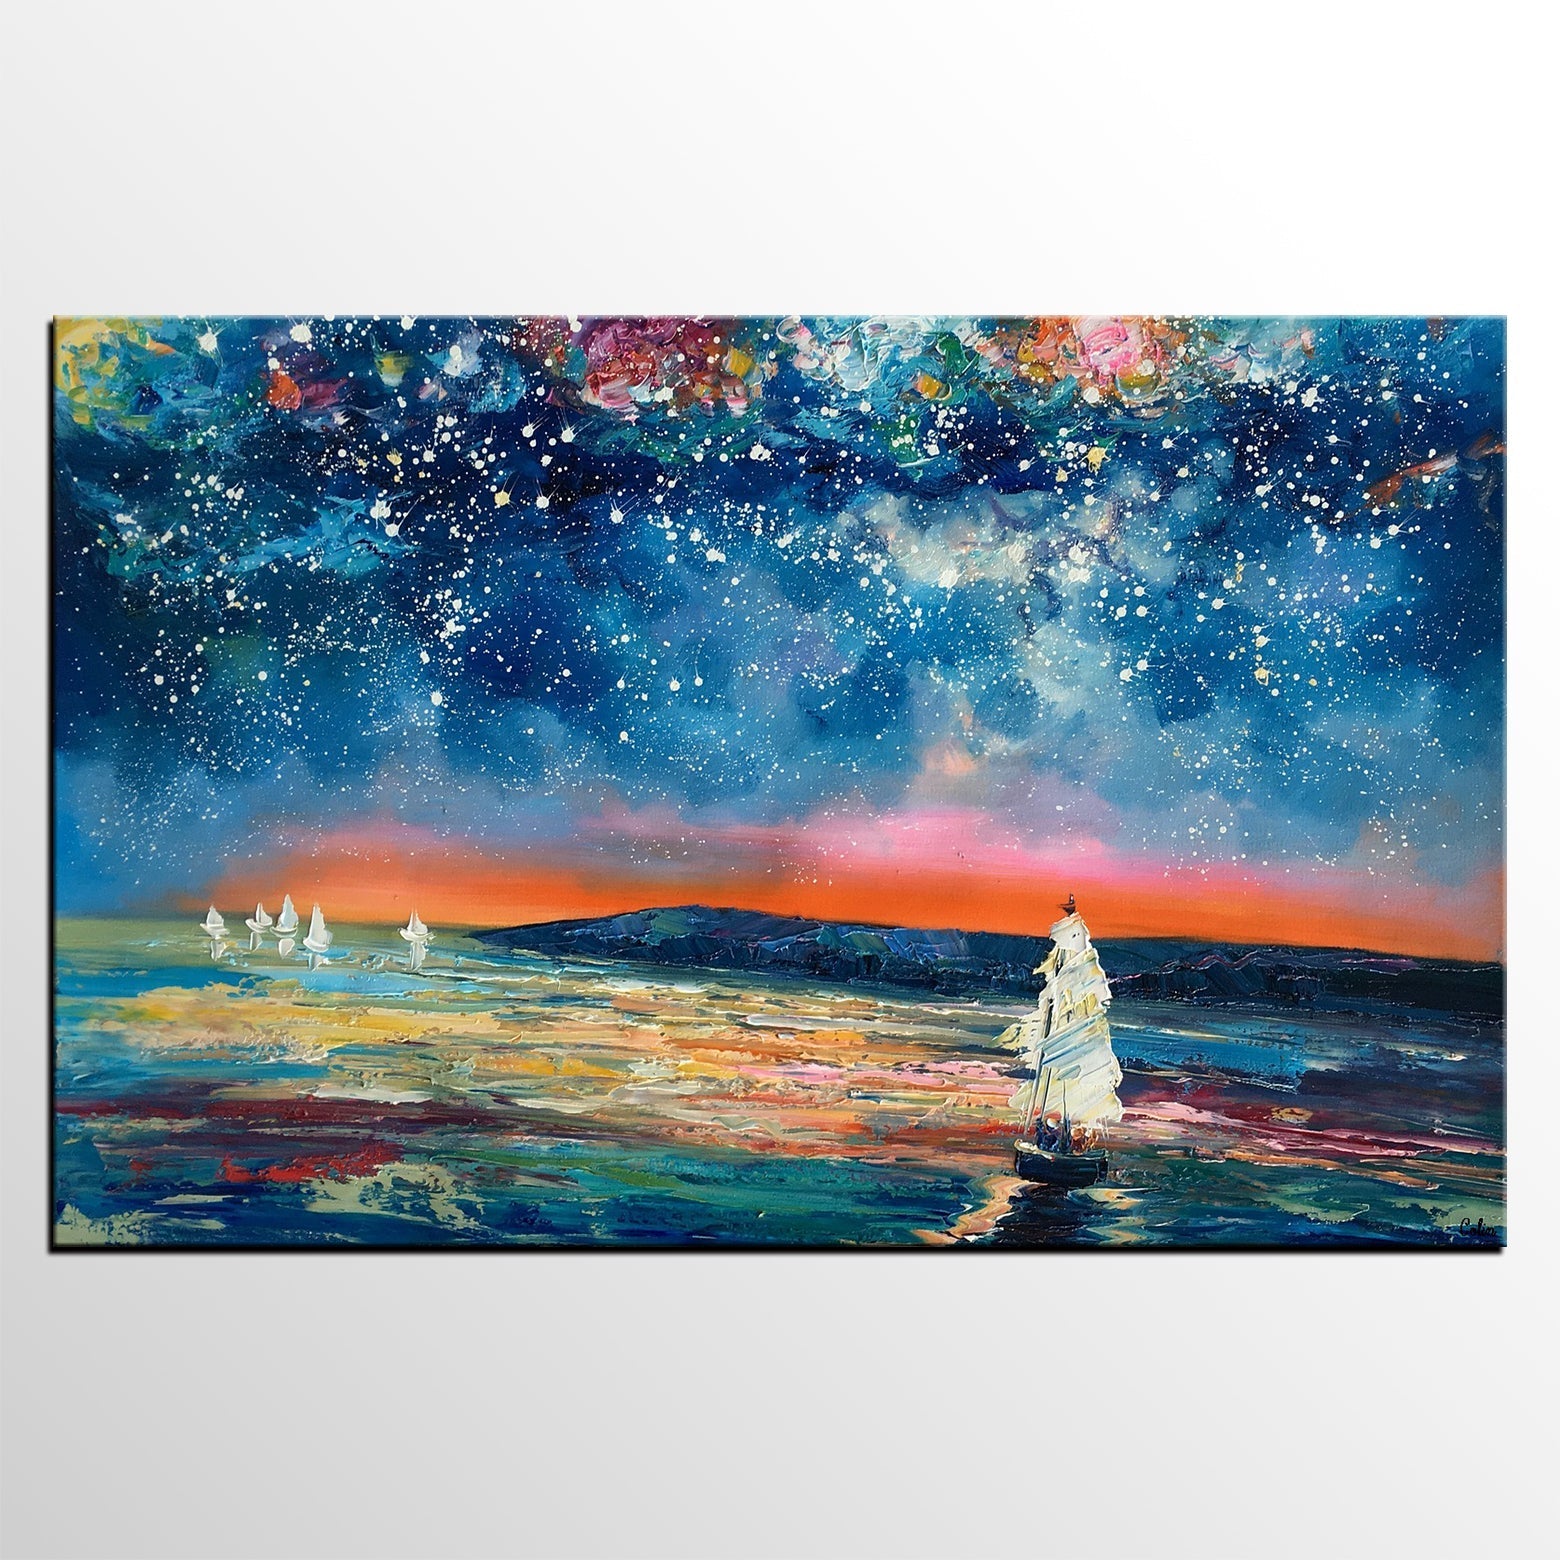 Canvas Painting, Abstract Art for Sale, Sail Boat under Starry Night Sky Painting, Custom Art, Buy Art Online-Art Painting Canvas